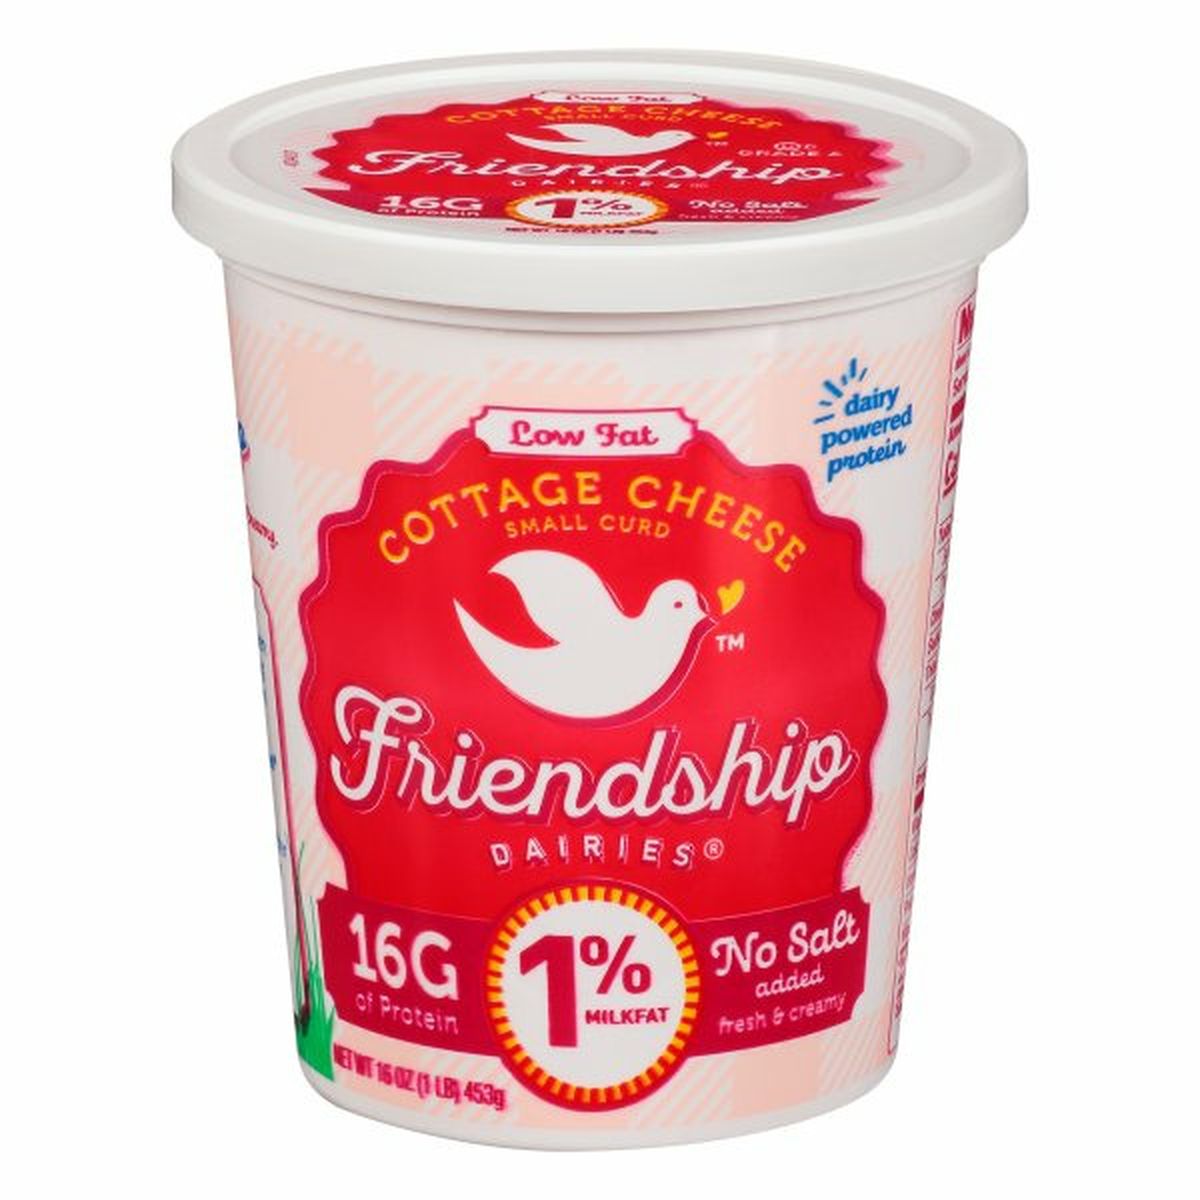 Calories in Friendship Cottage Cheese, Small Curd, 1% Milkfat, Low Fat